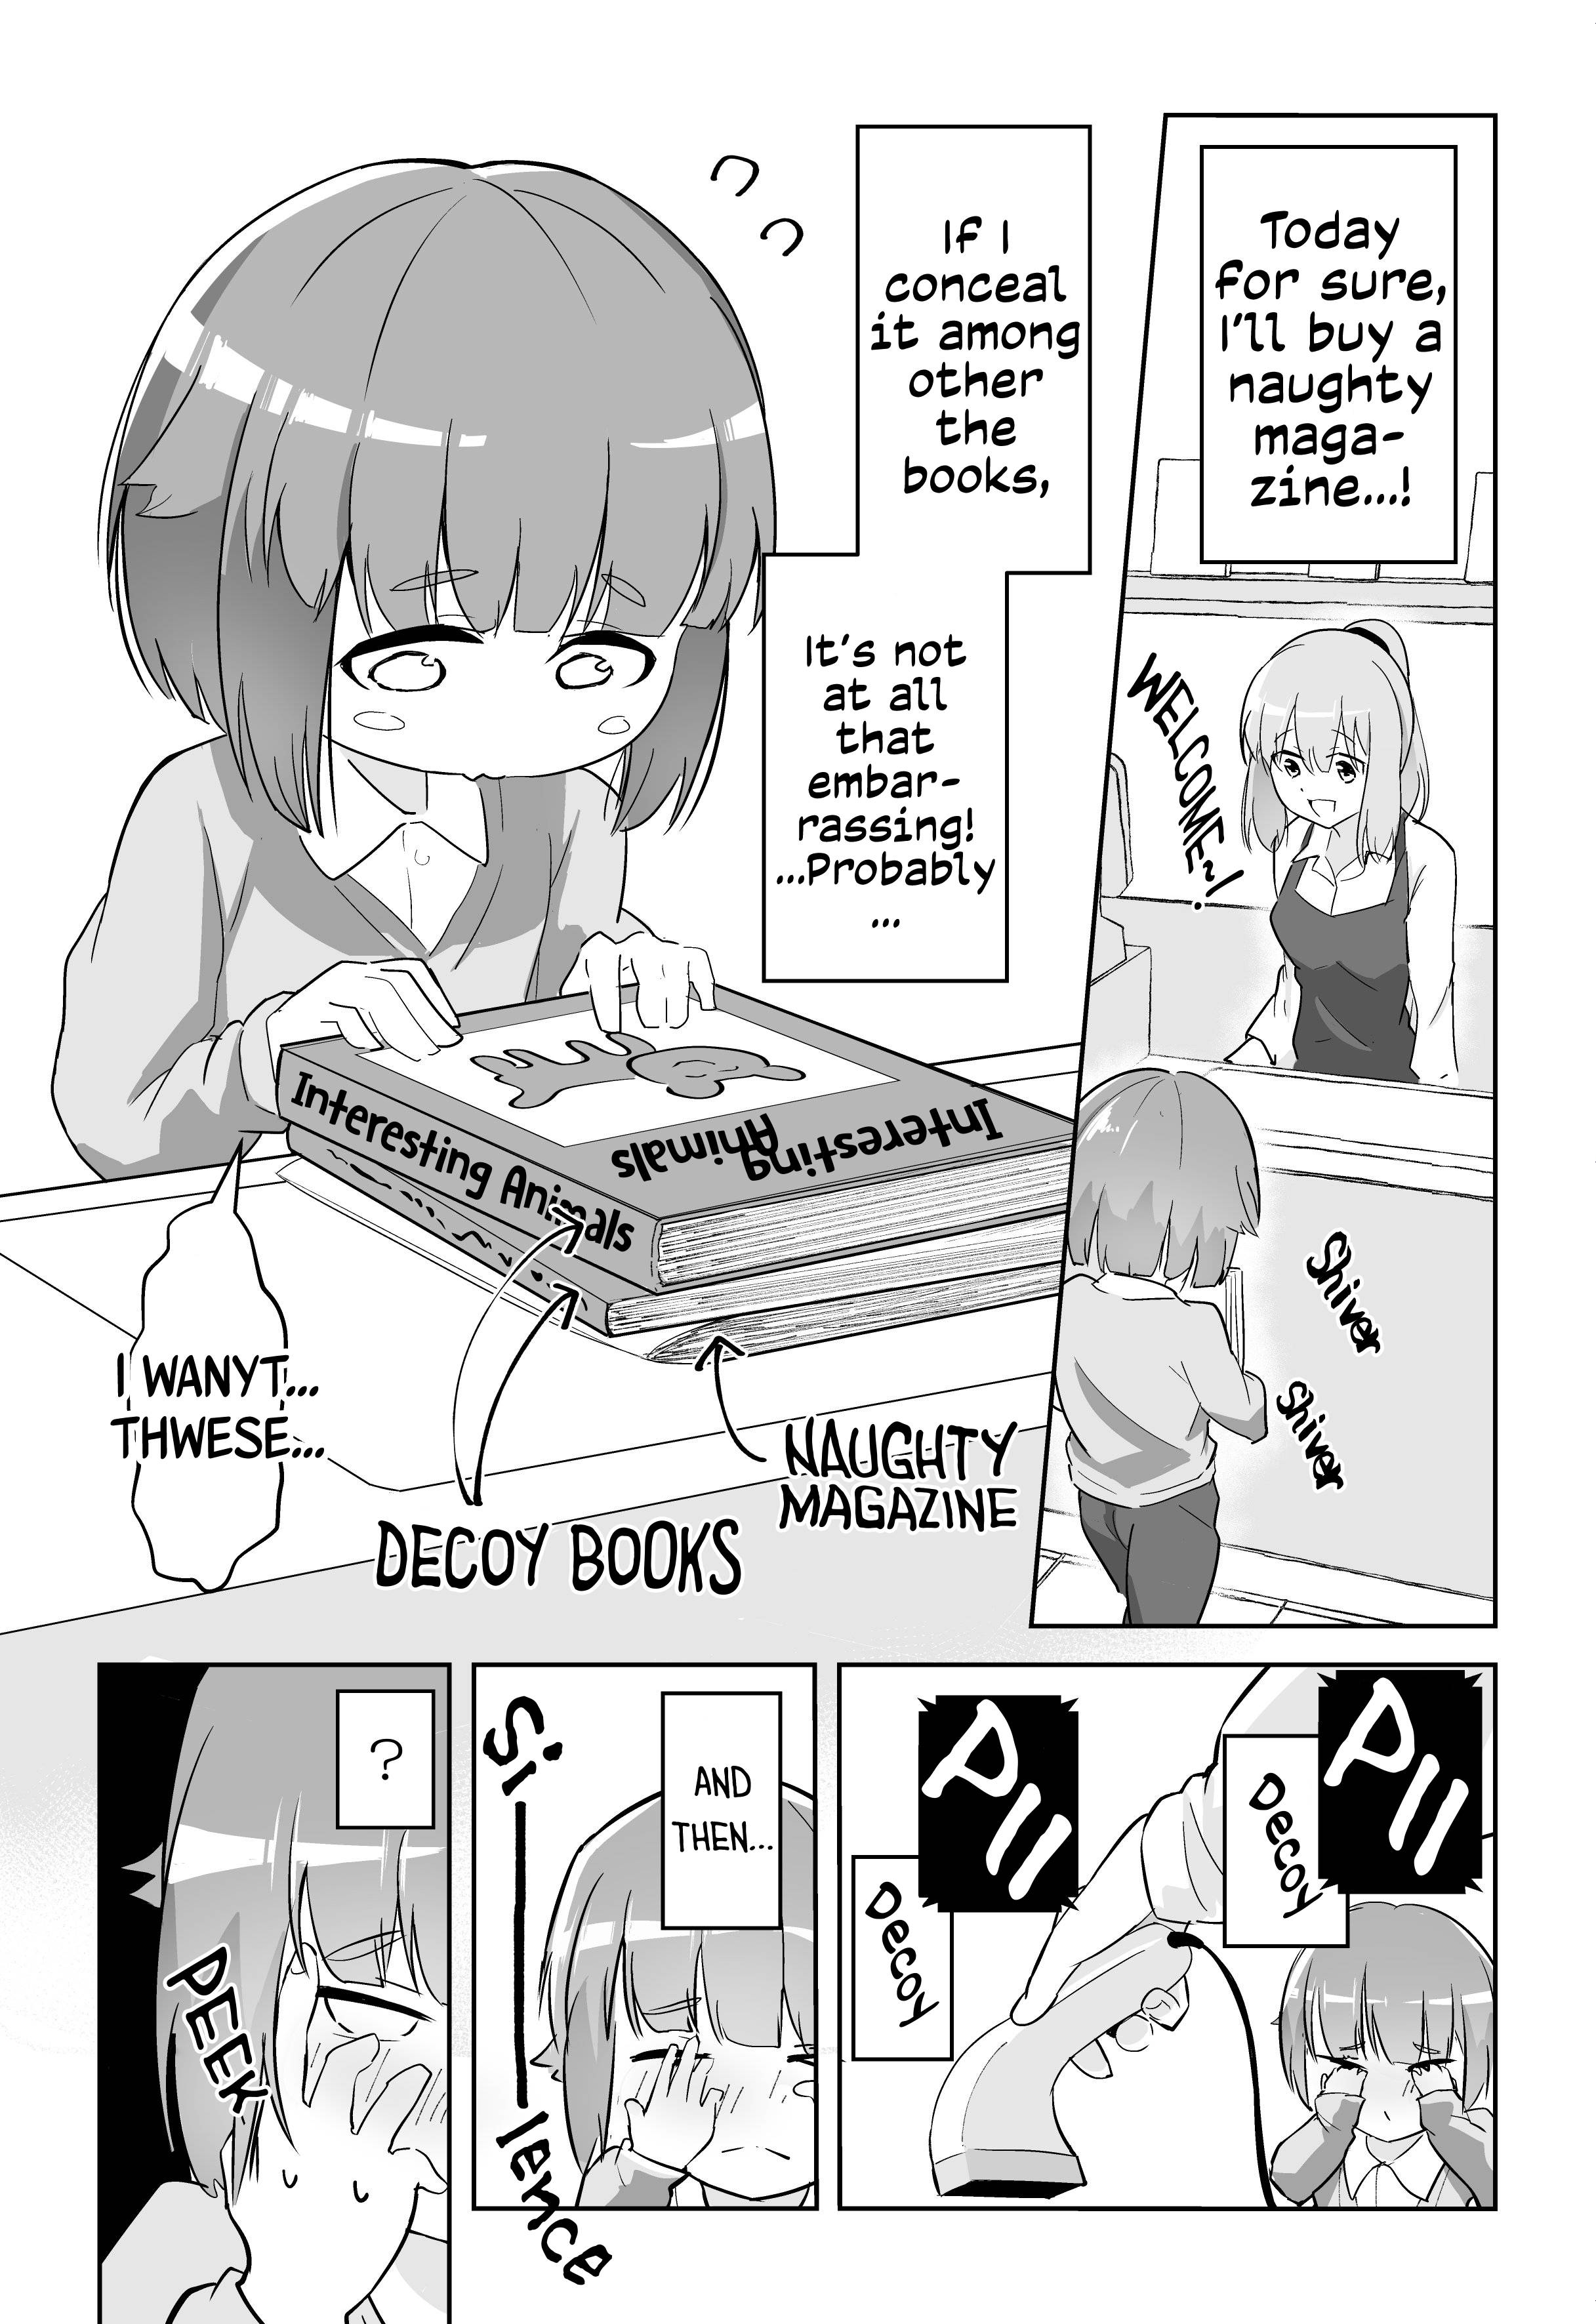 The Shota Who Wants To Buy A Naughty Magazine And The Onee-San Who Wants To Sell Him One - chapter 12 - #1